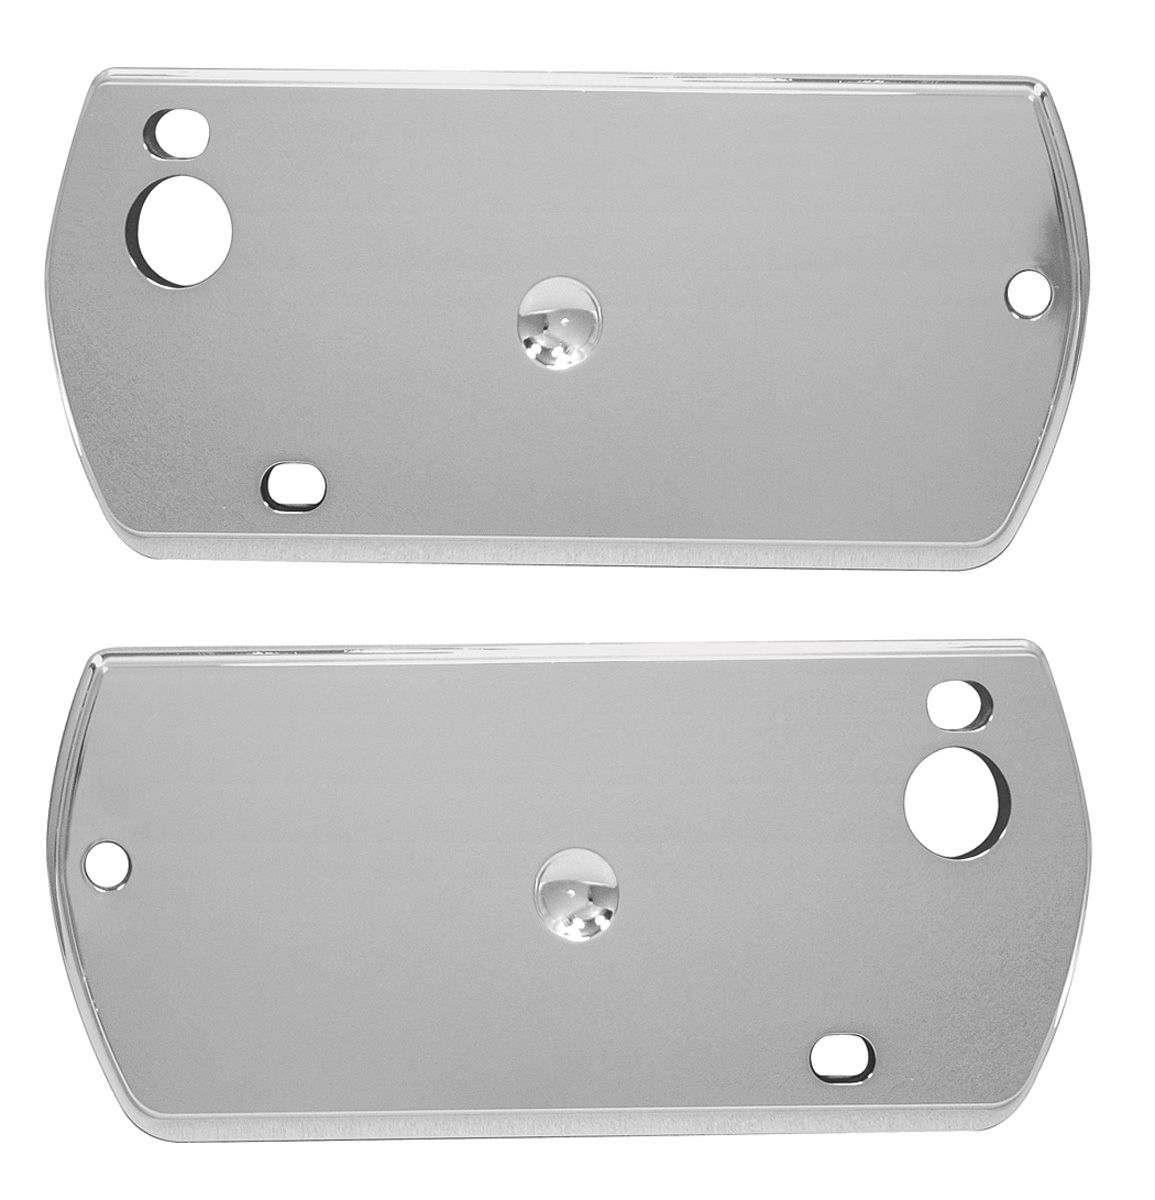 1970 Chevelle Front Armrest Bases COMPLETE Also Includes Chrome Backing Plates